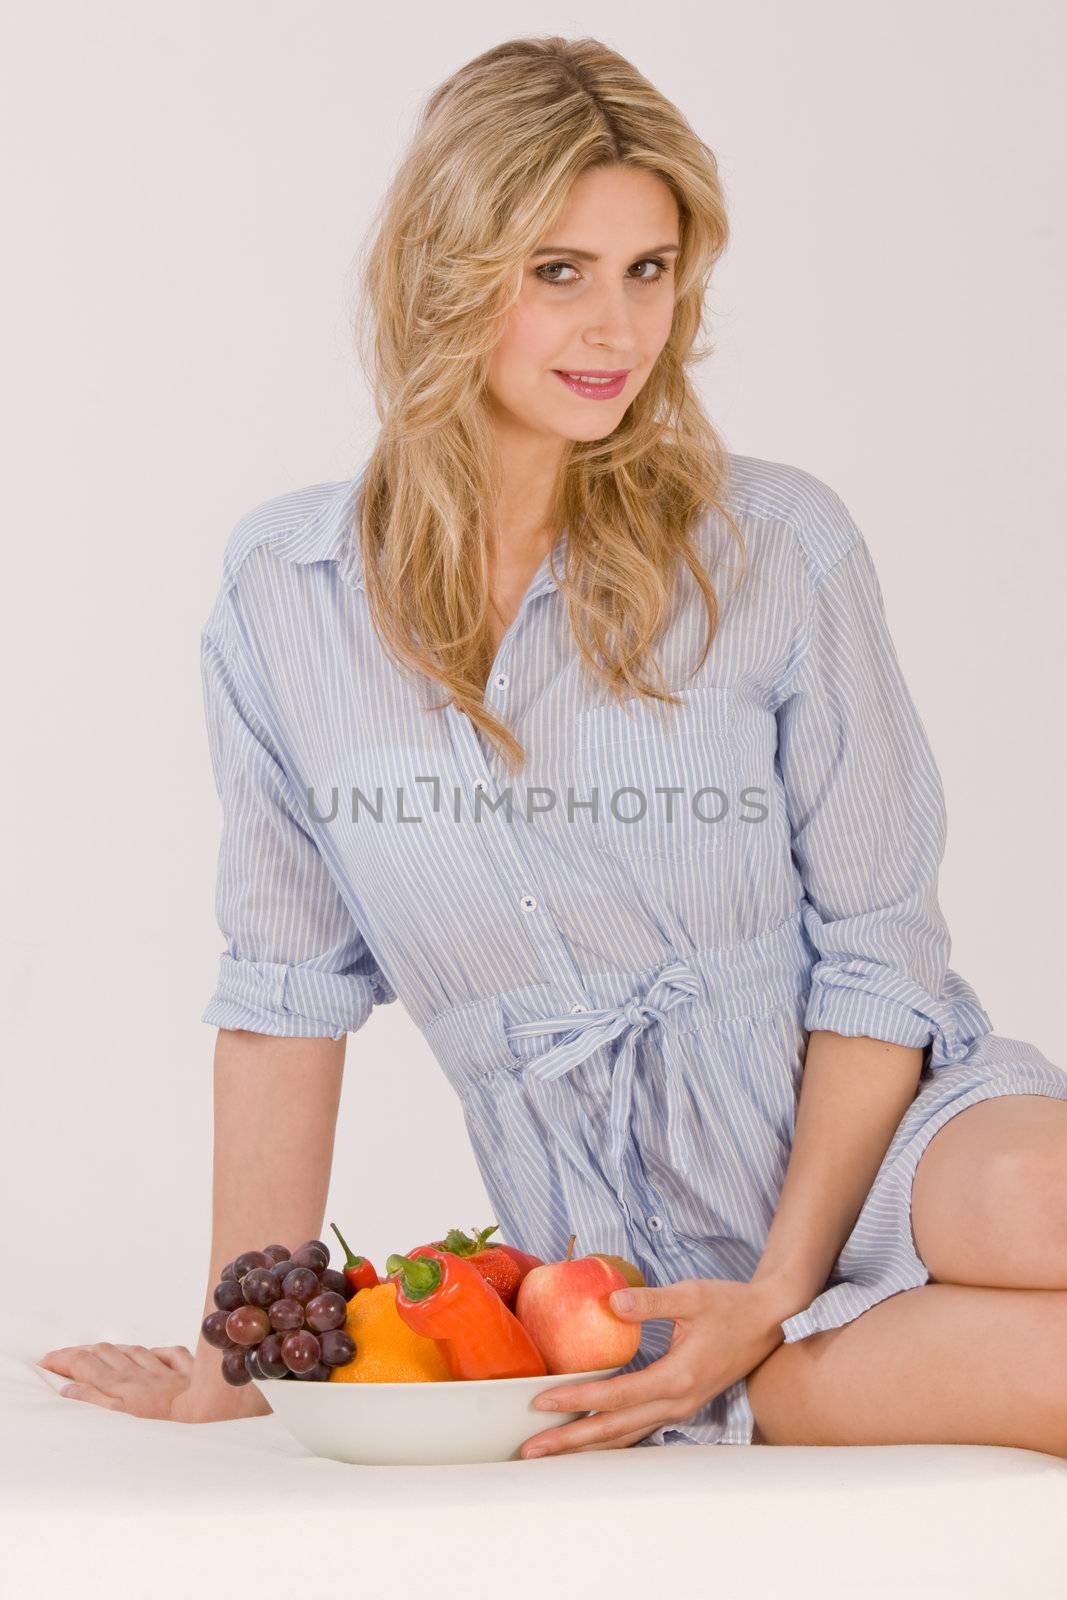 Young woman sitting with a bowl of fruit